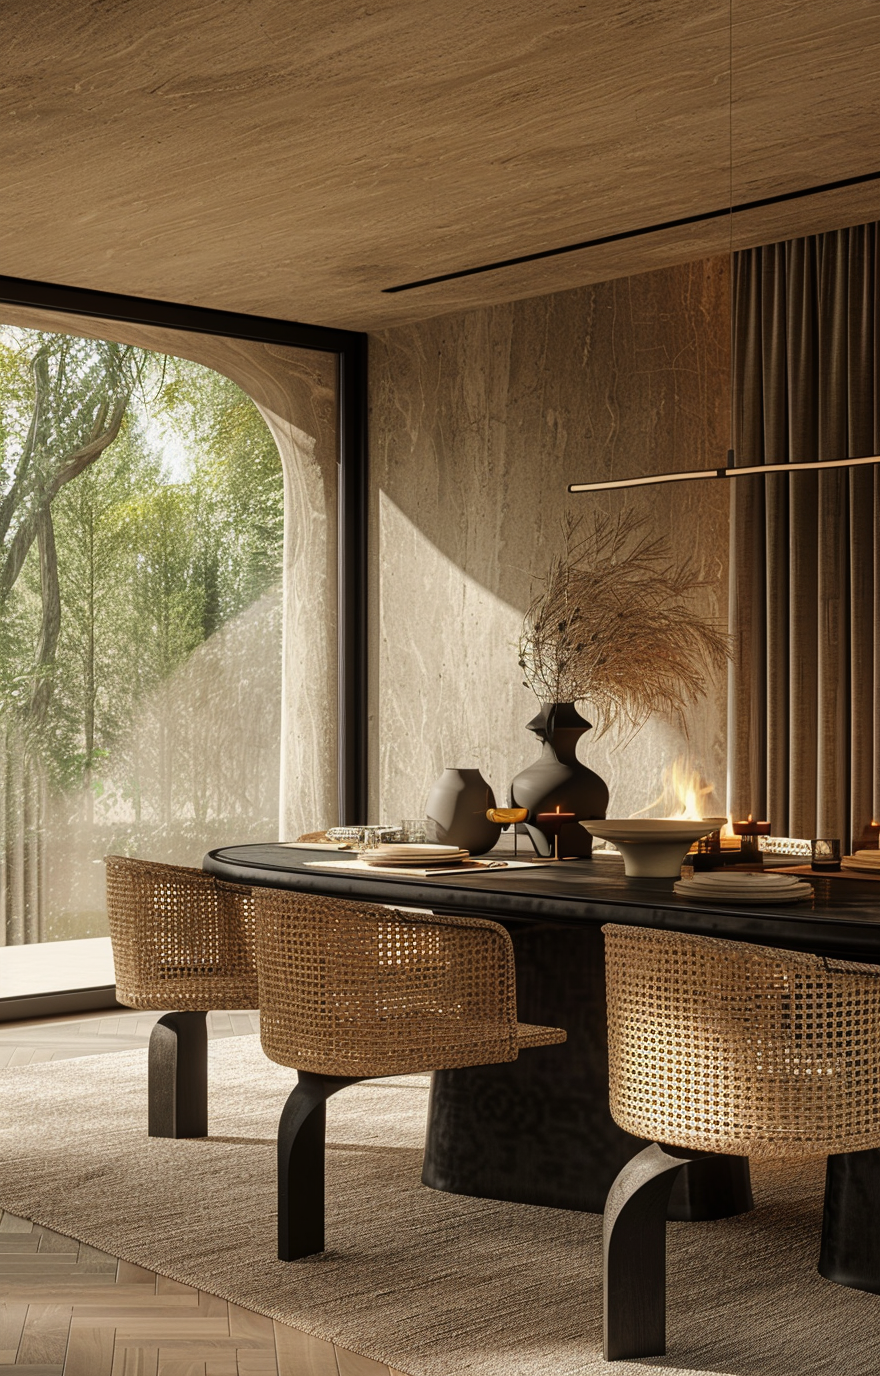 Inviting Japanese dining room separated by noren curtains at the entrance